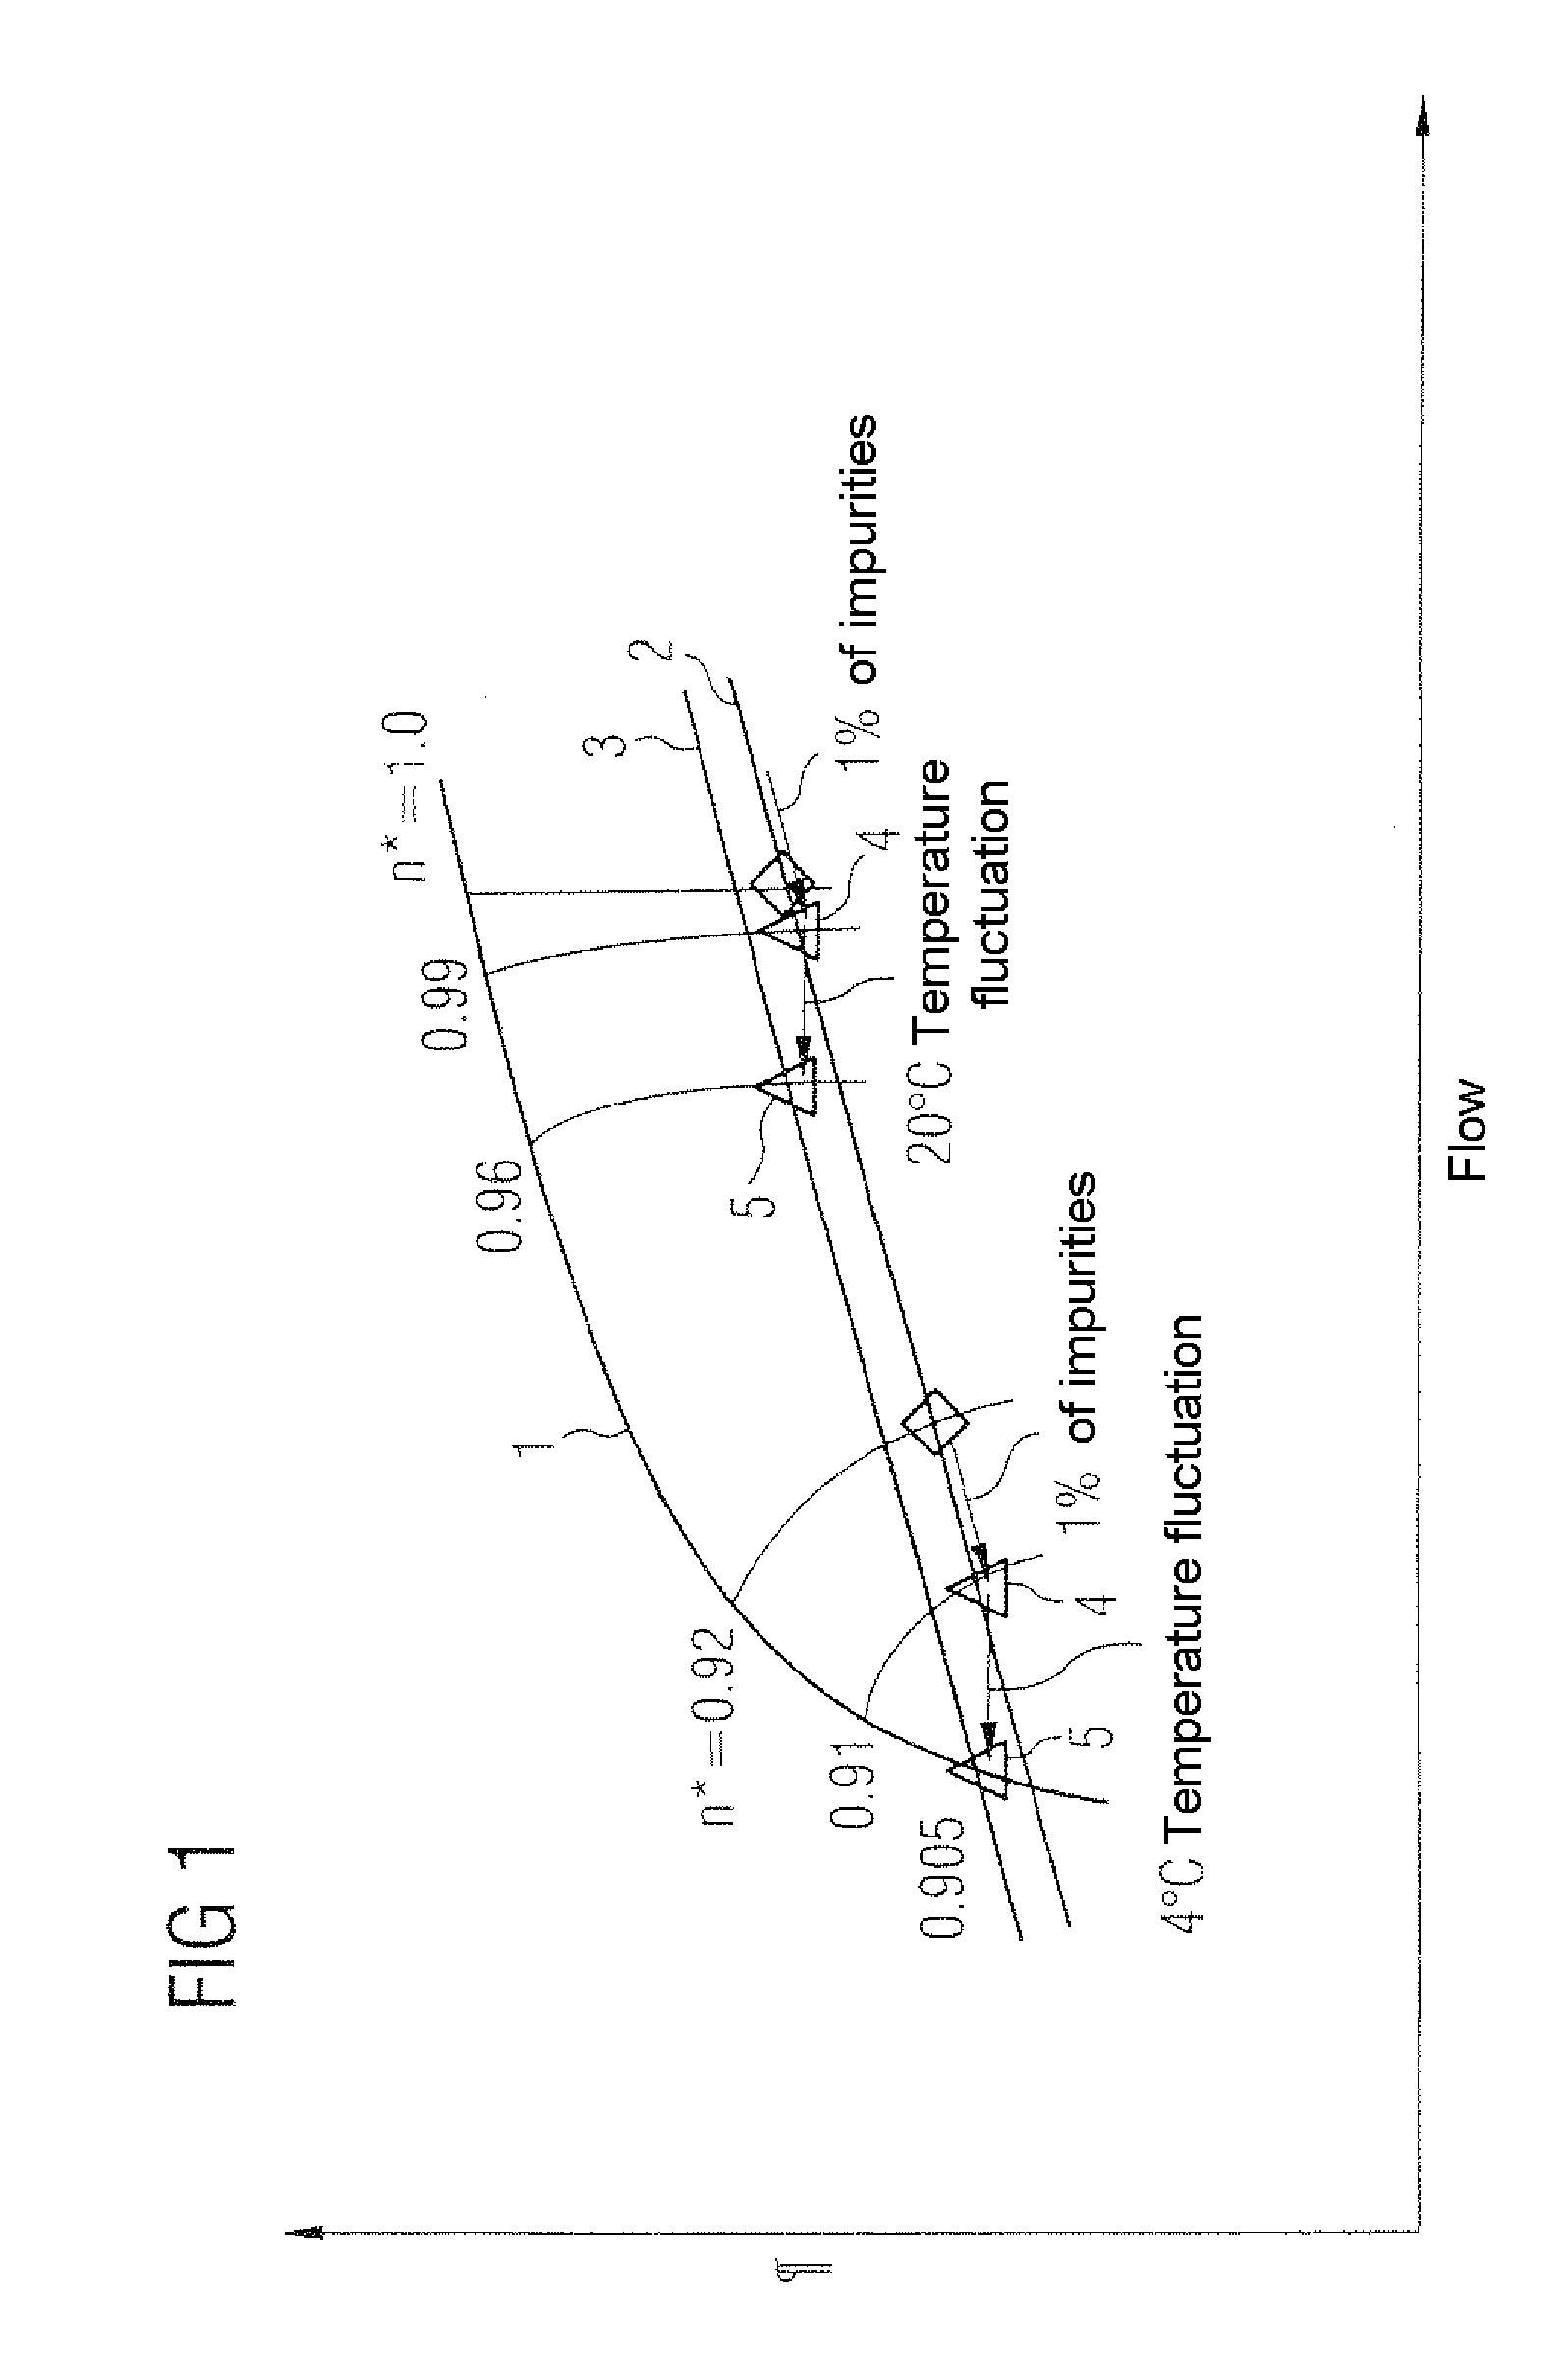 Method for the Operation of a Compressor of a Gas Turbine With Evaporative Cooling of the Compressor Induction Air